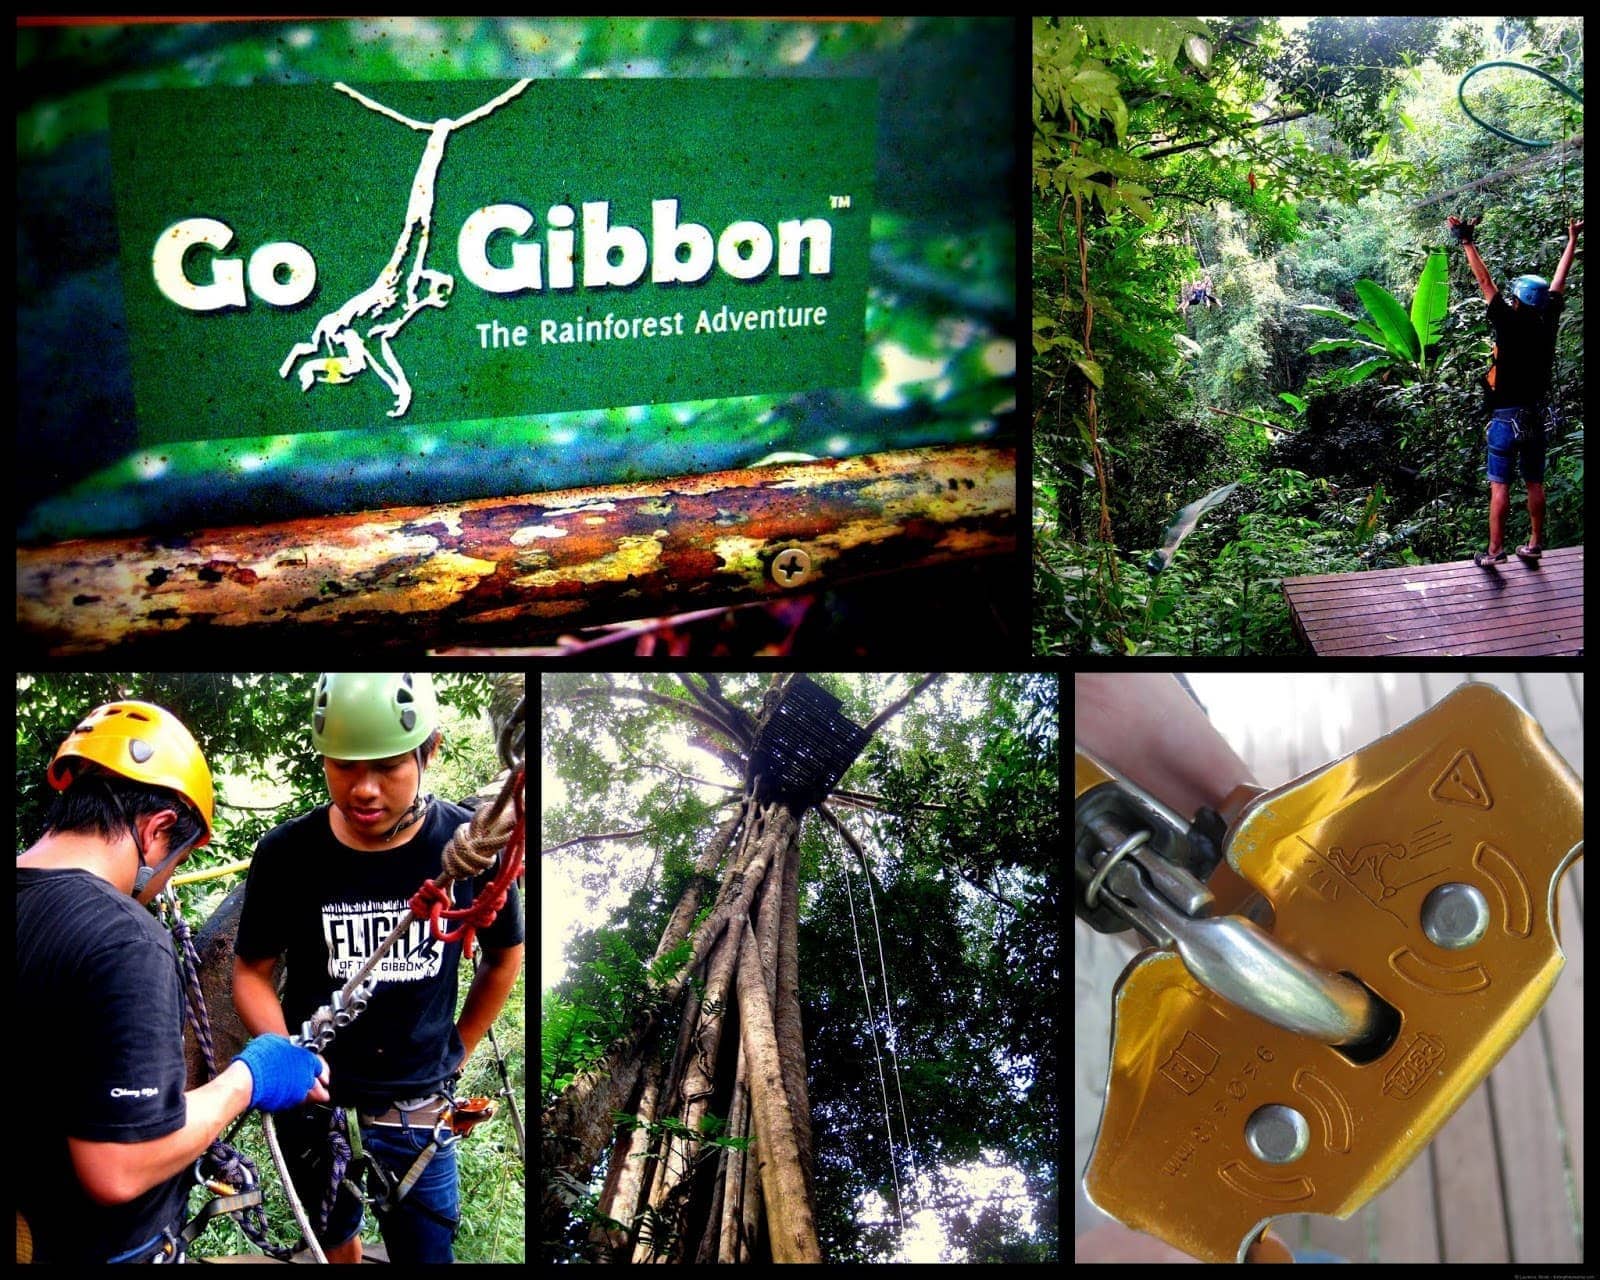 Flight of the Gibbon zip lining collage 3